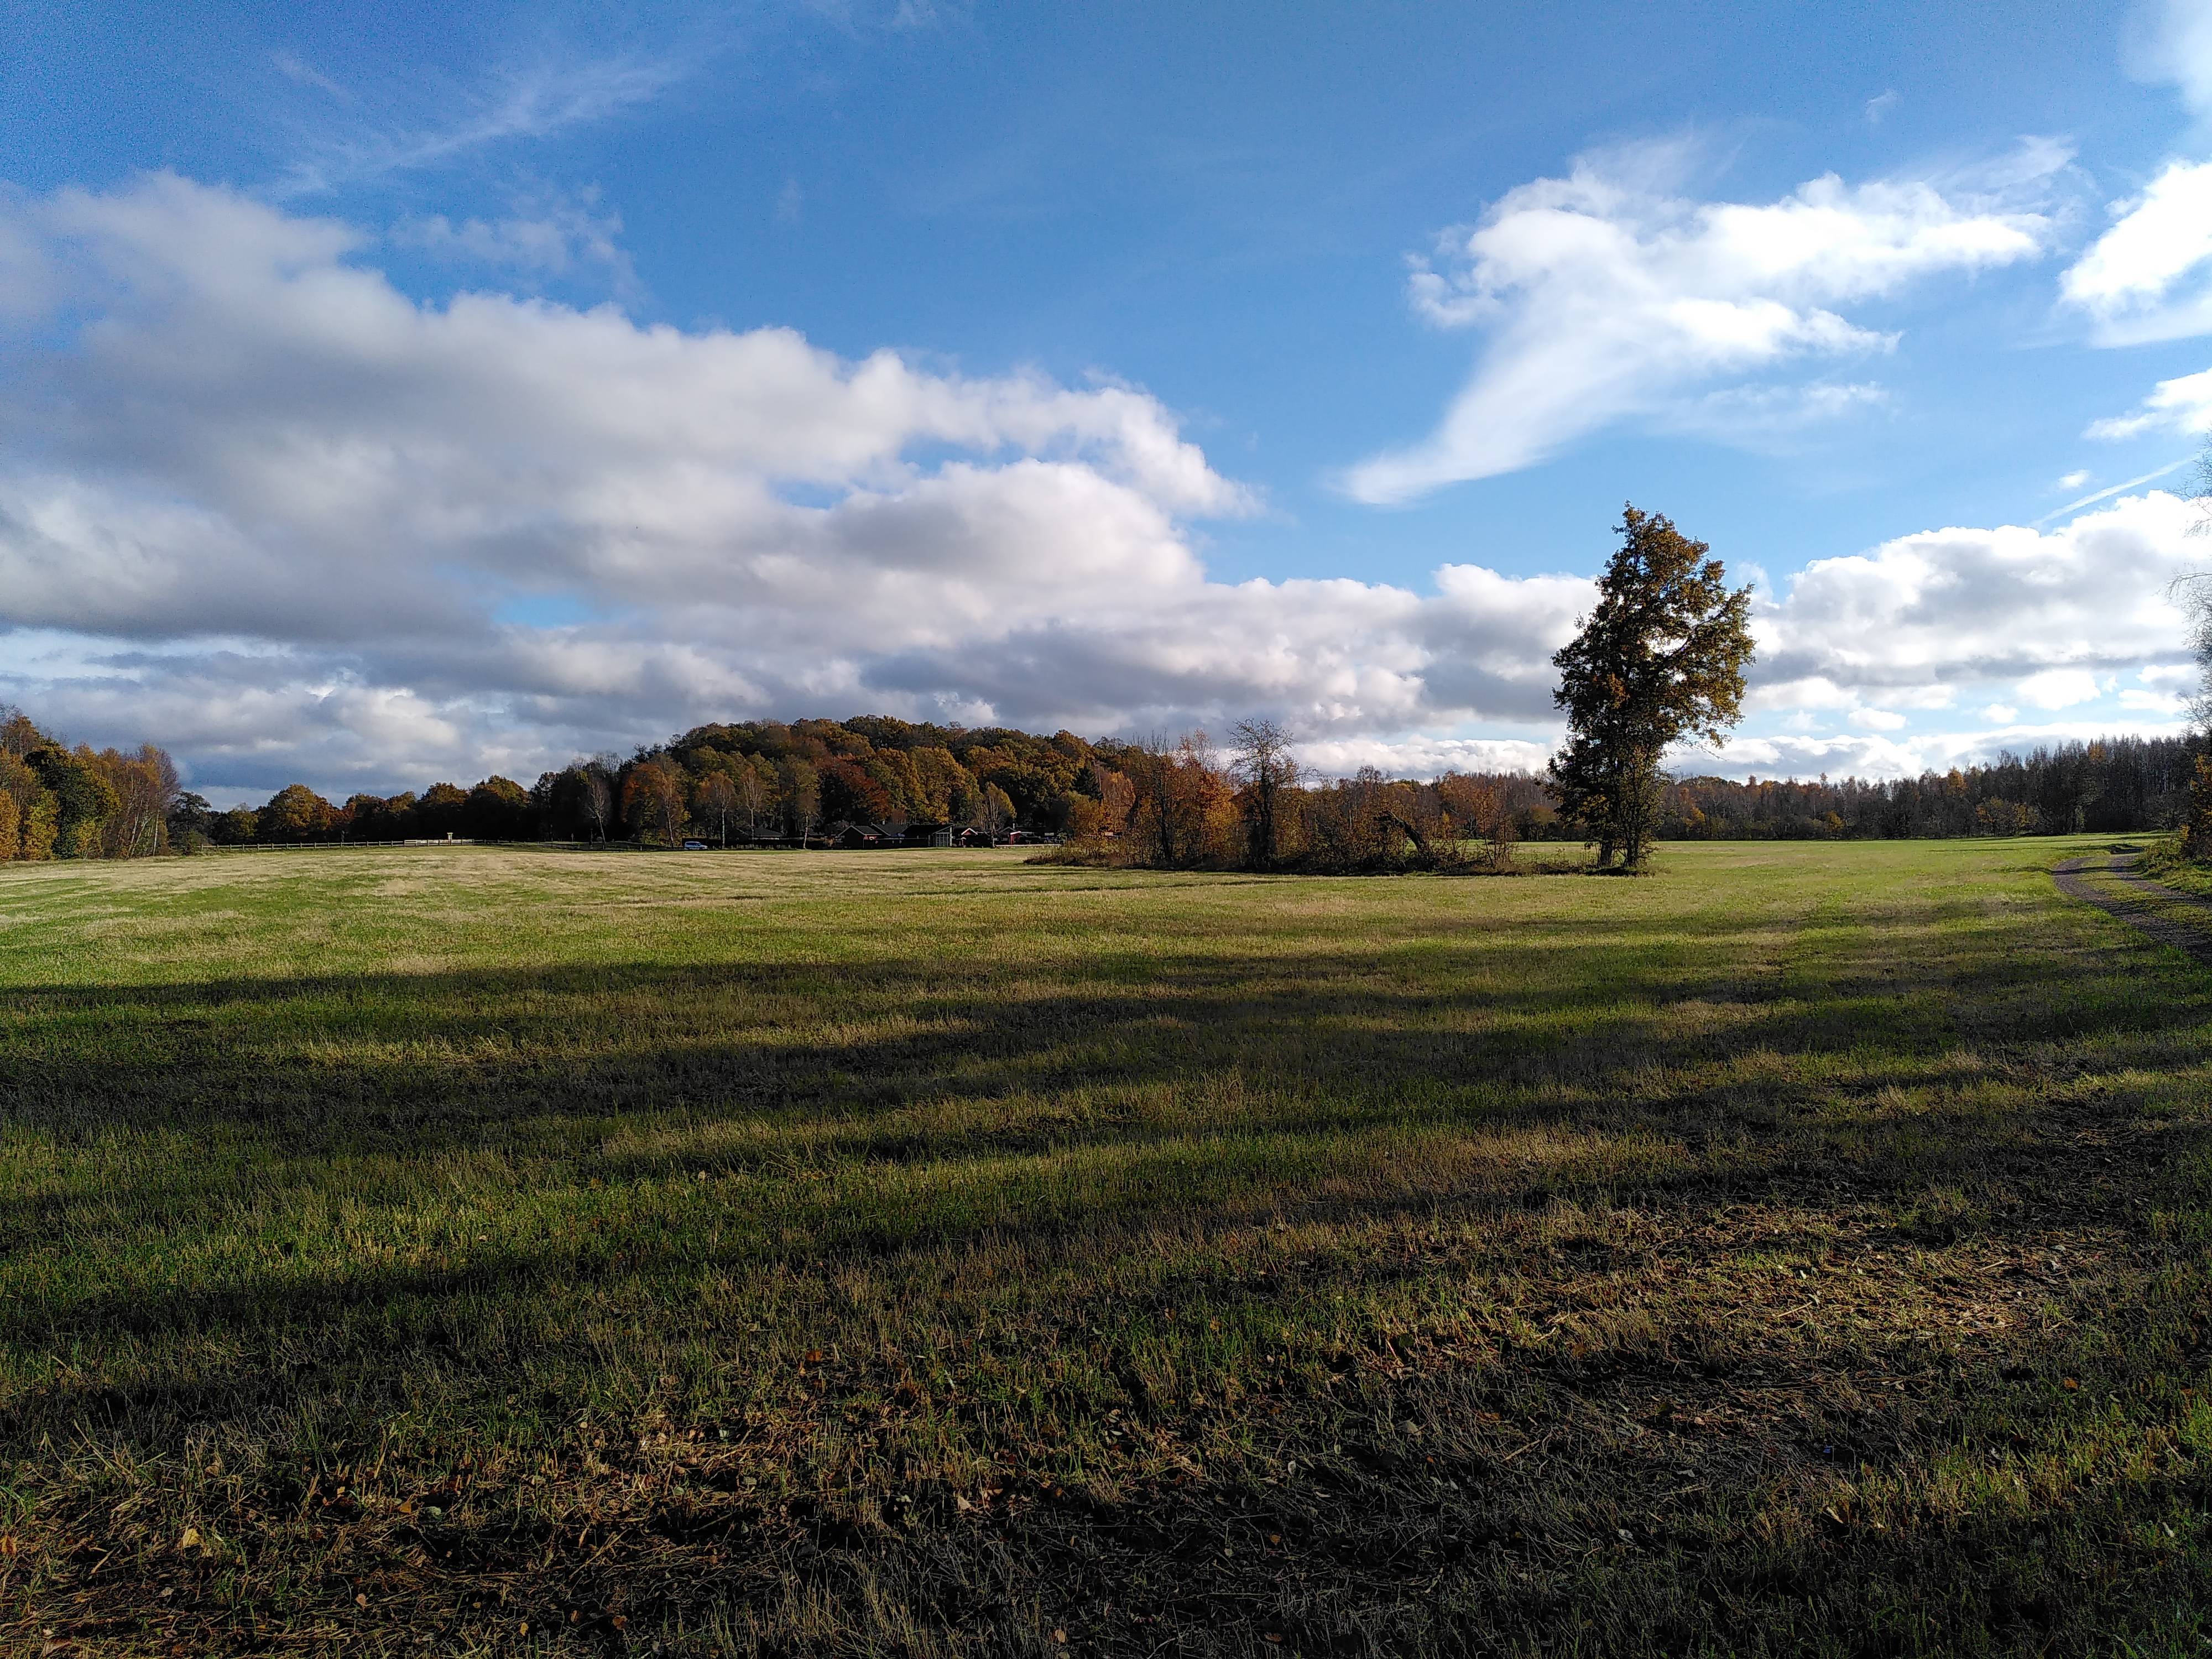 A flat green field with some trees and shadows. Huge white clouds in a blue sky.